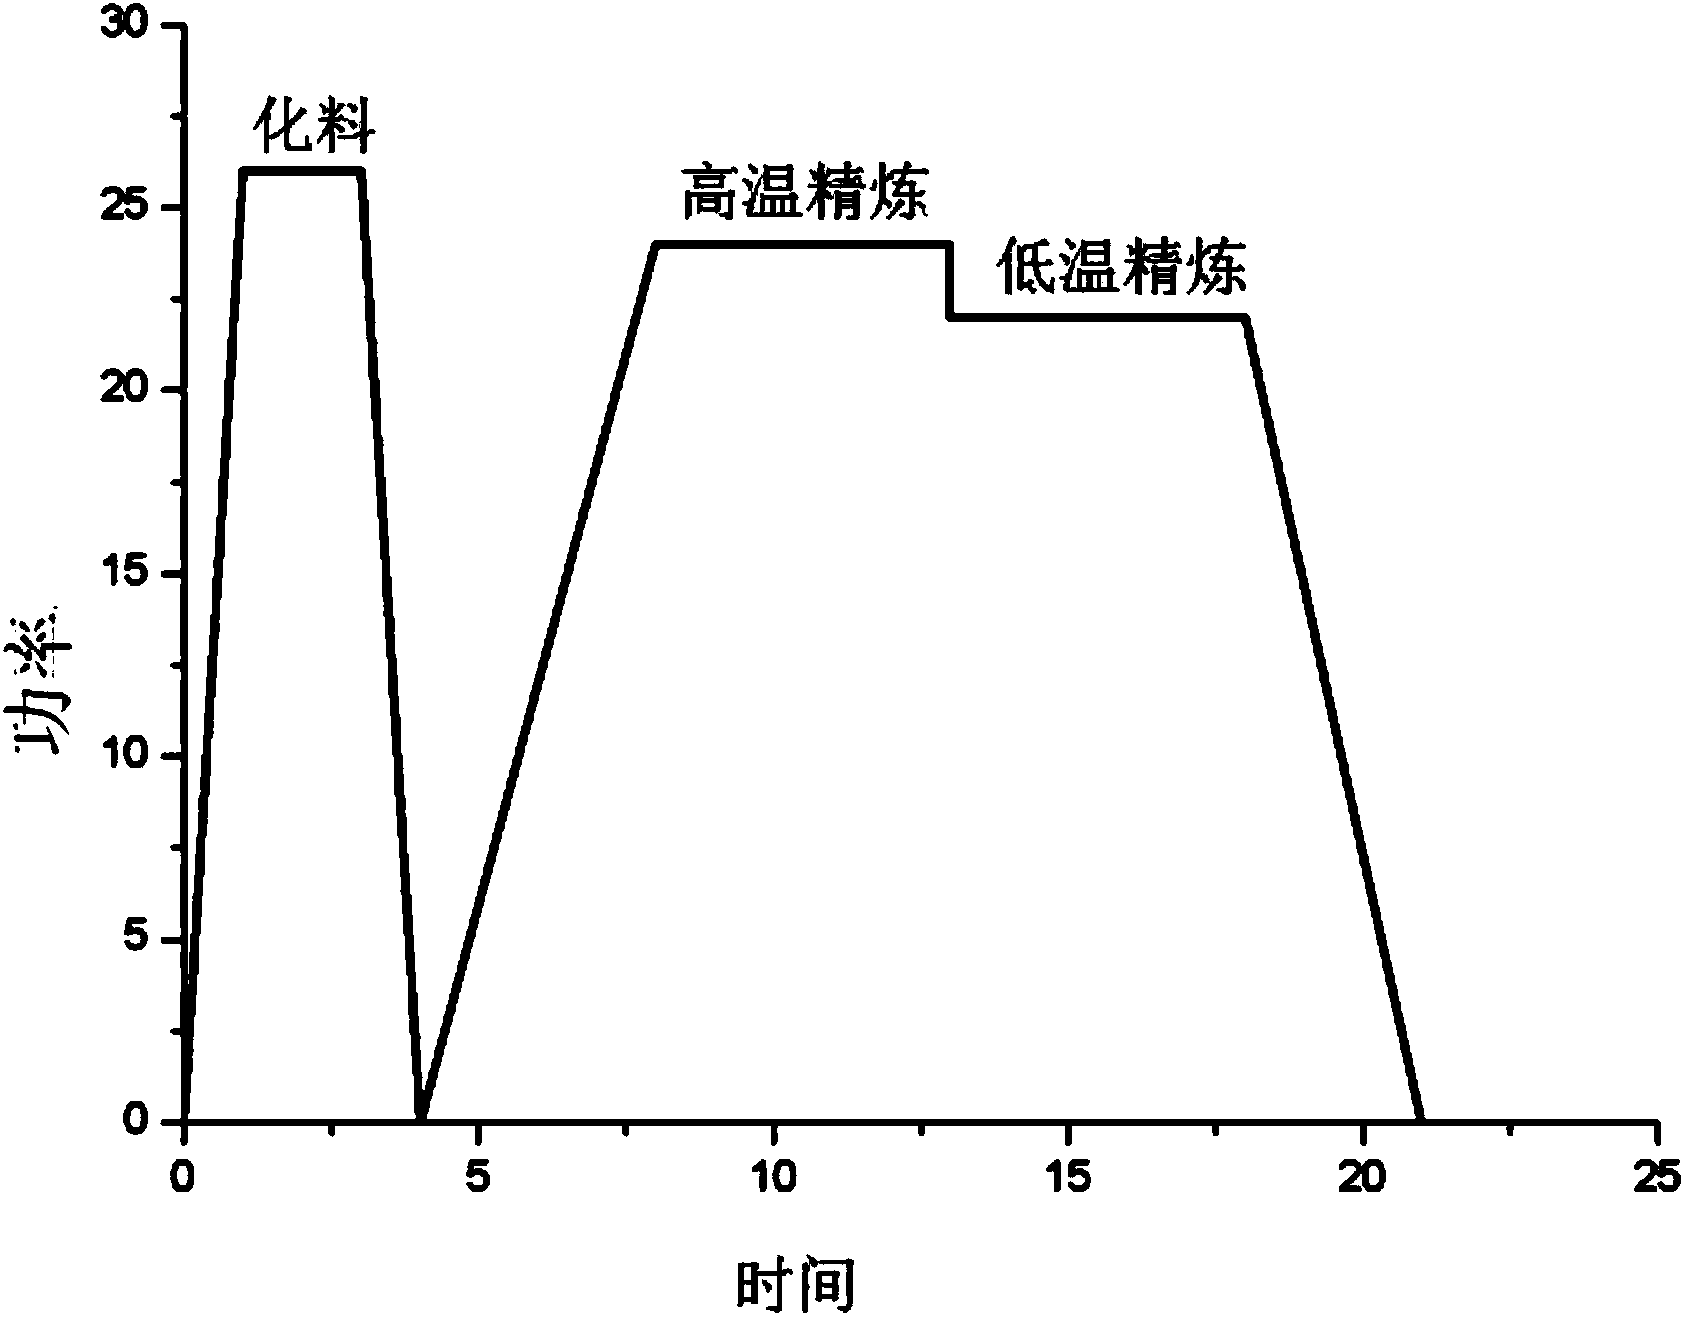 High purity smelting method for nickel-based high-temperature alloy